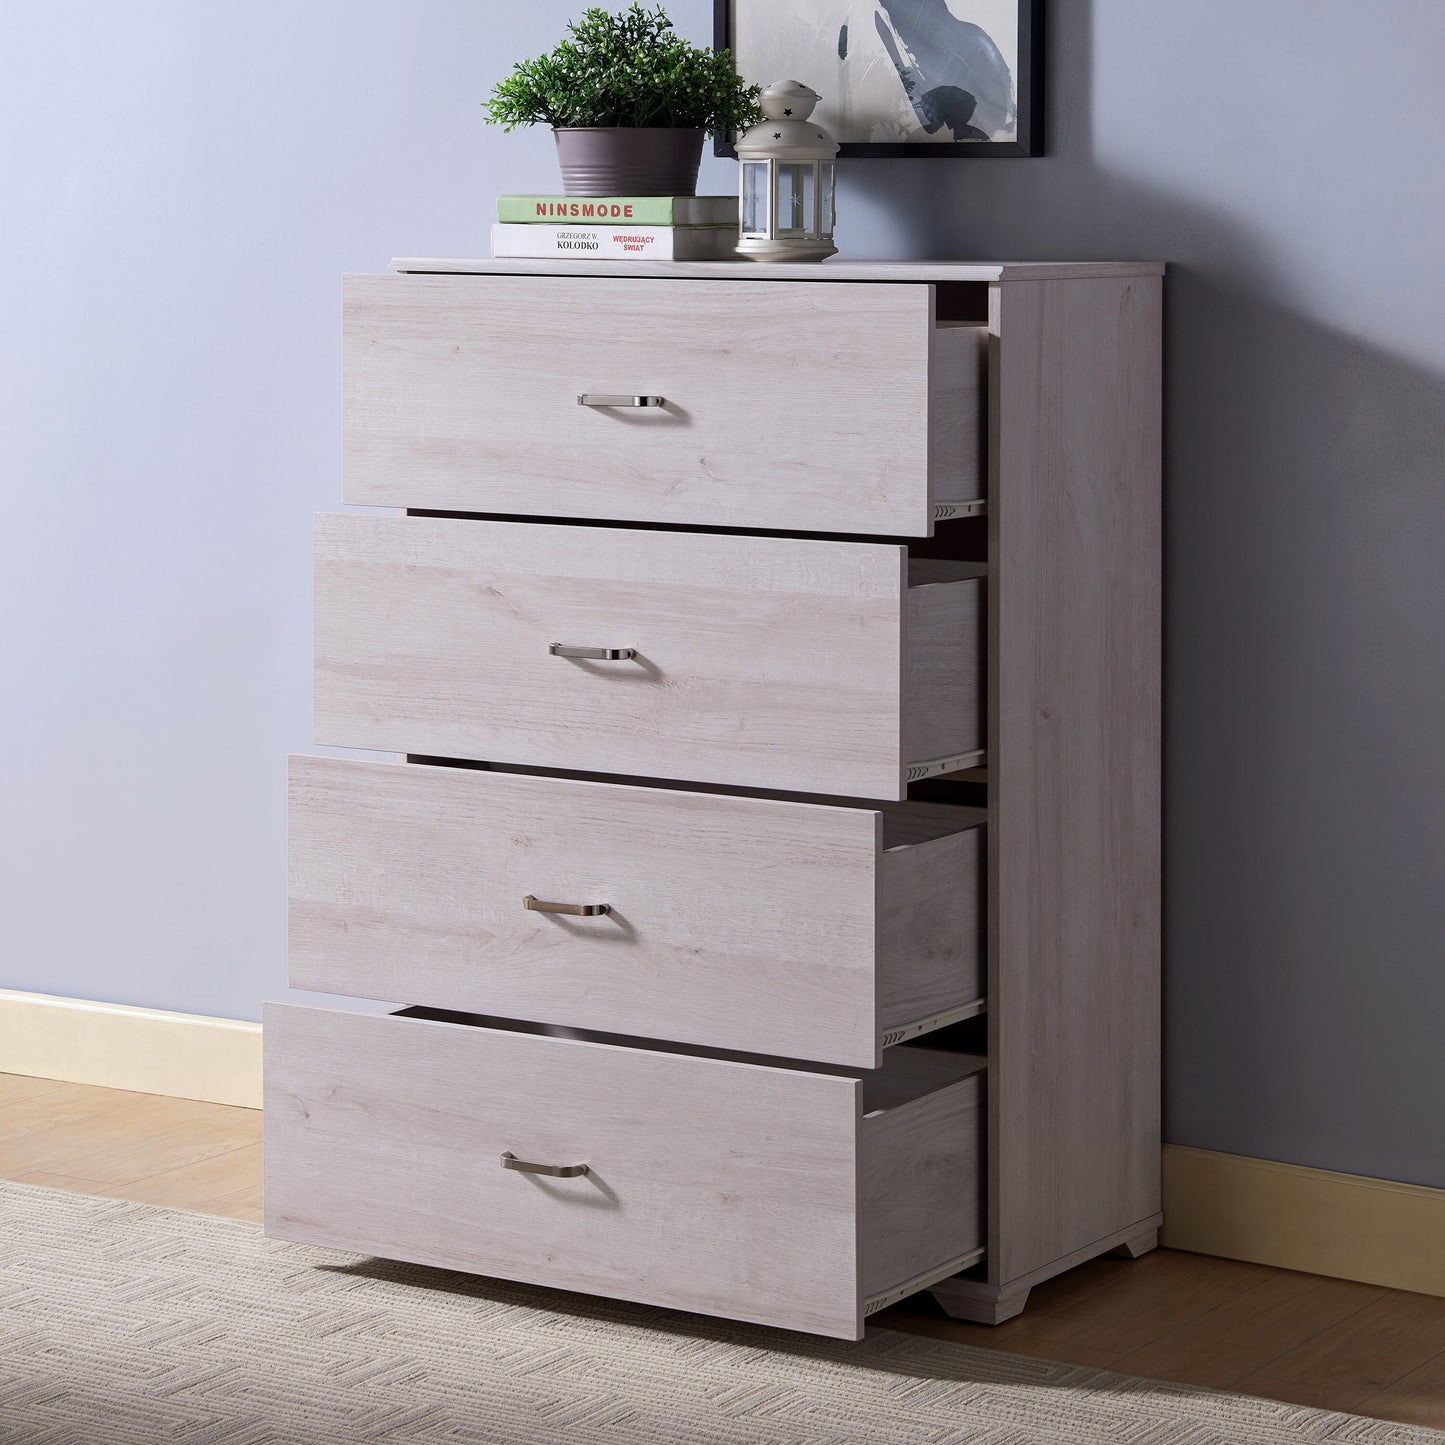 Left angled contemporary white oak four-drawer chest dresser with all drawers open with a rug and accessories